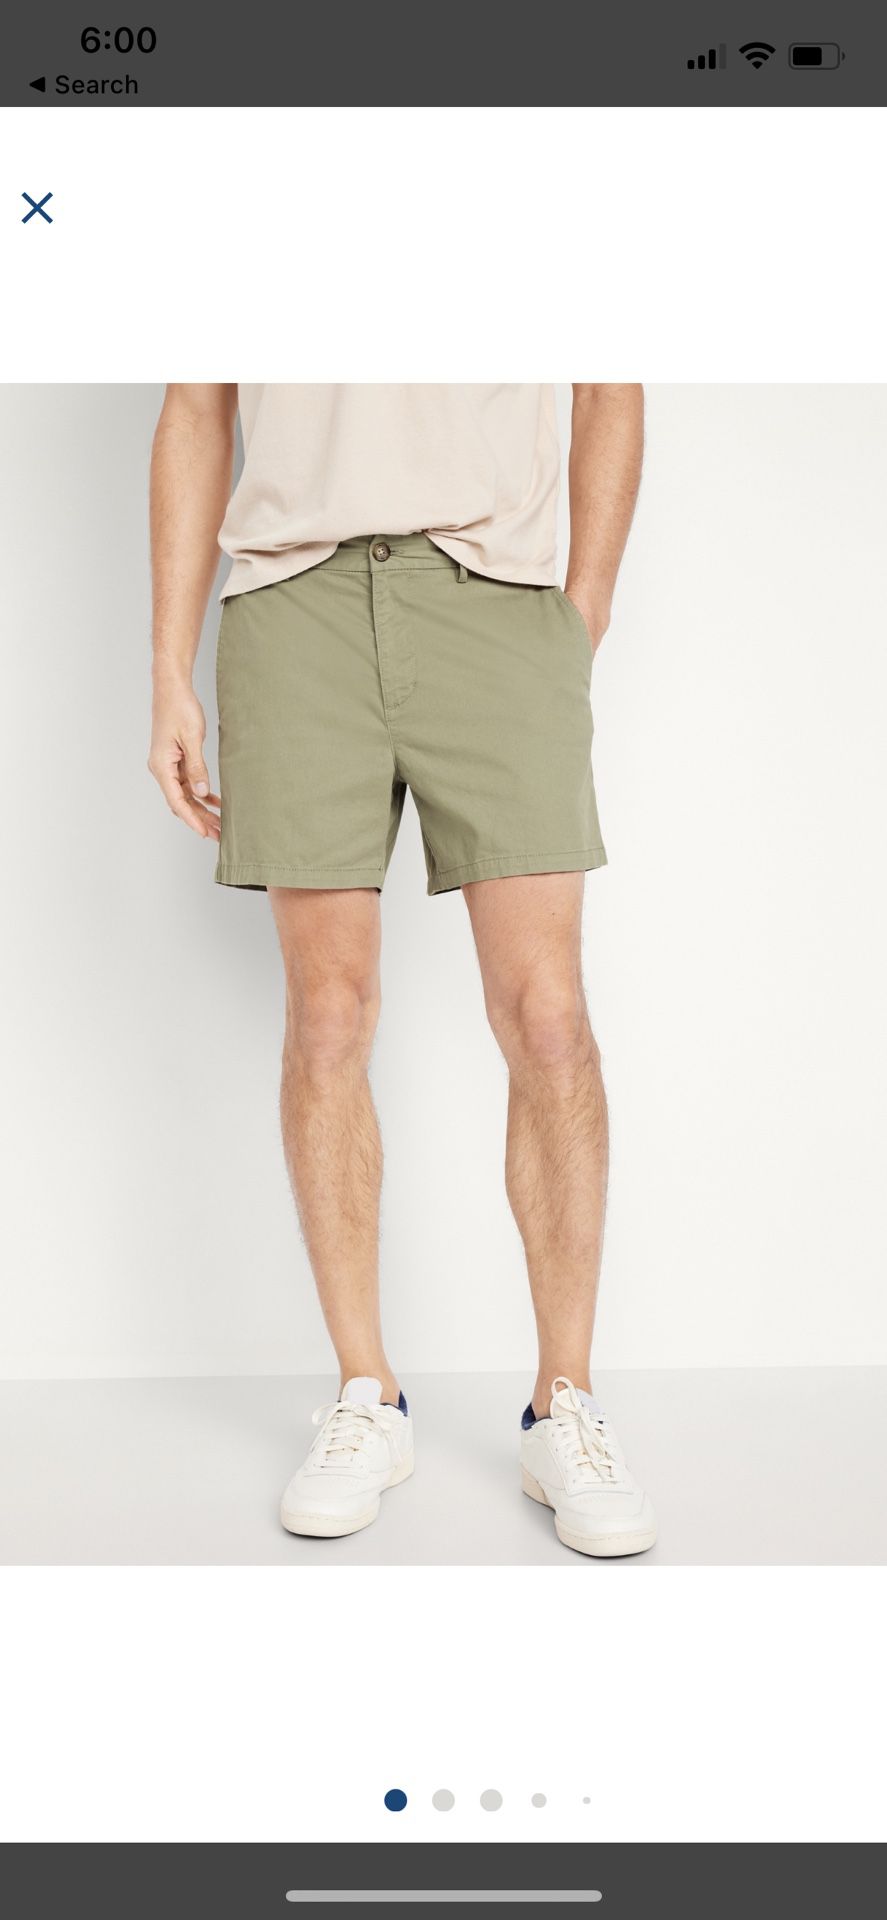 NWT Slim Built-In Flex Rotation 5-inch Inseam Chino Shorts in Simply Sage